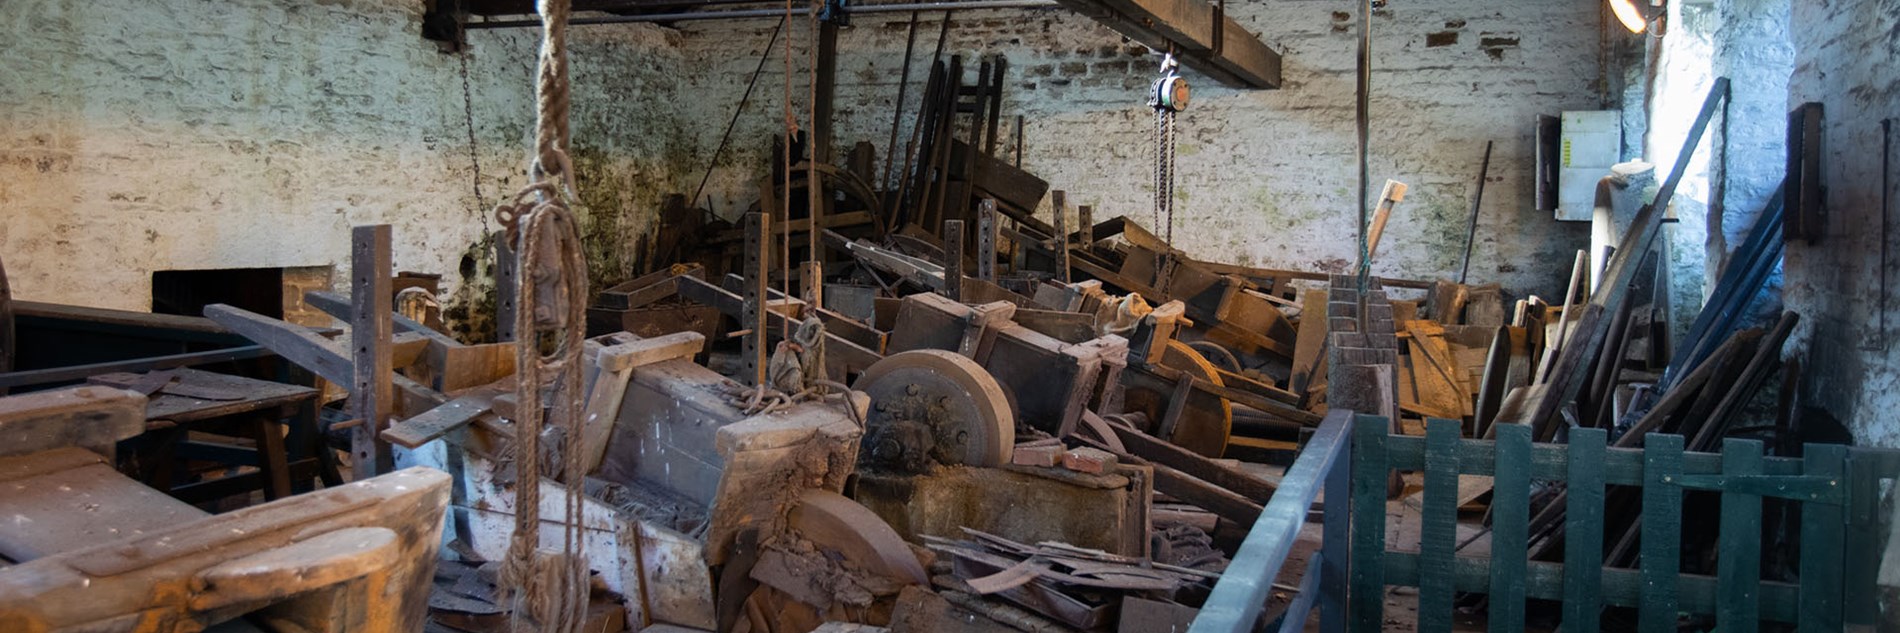 Old whitewashed workshop with exposed wooden roof beams and a row of grinding wheels with ‘saddles’.